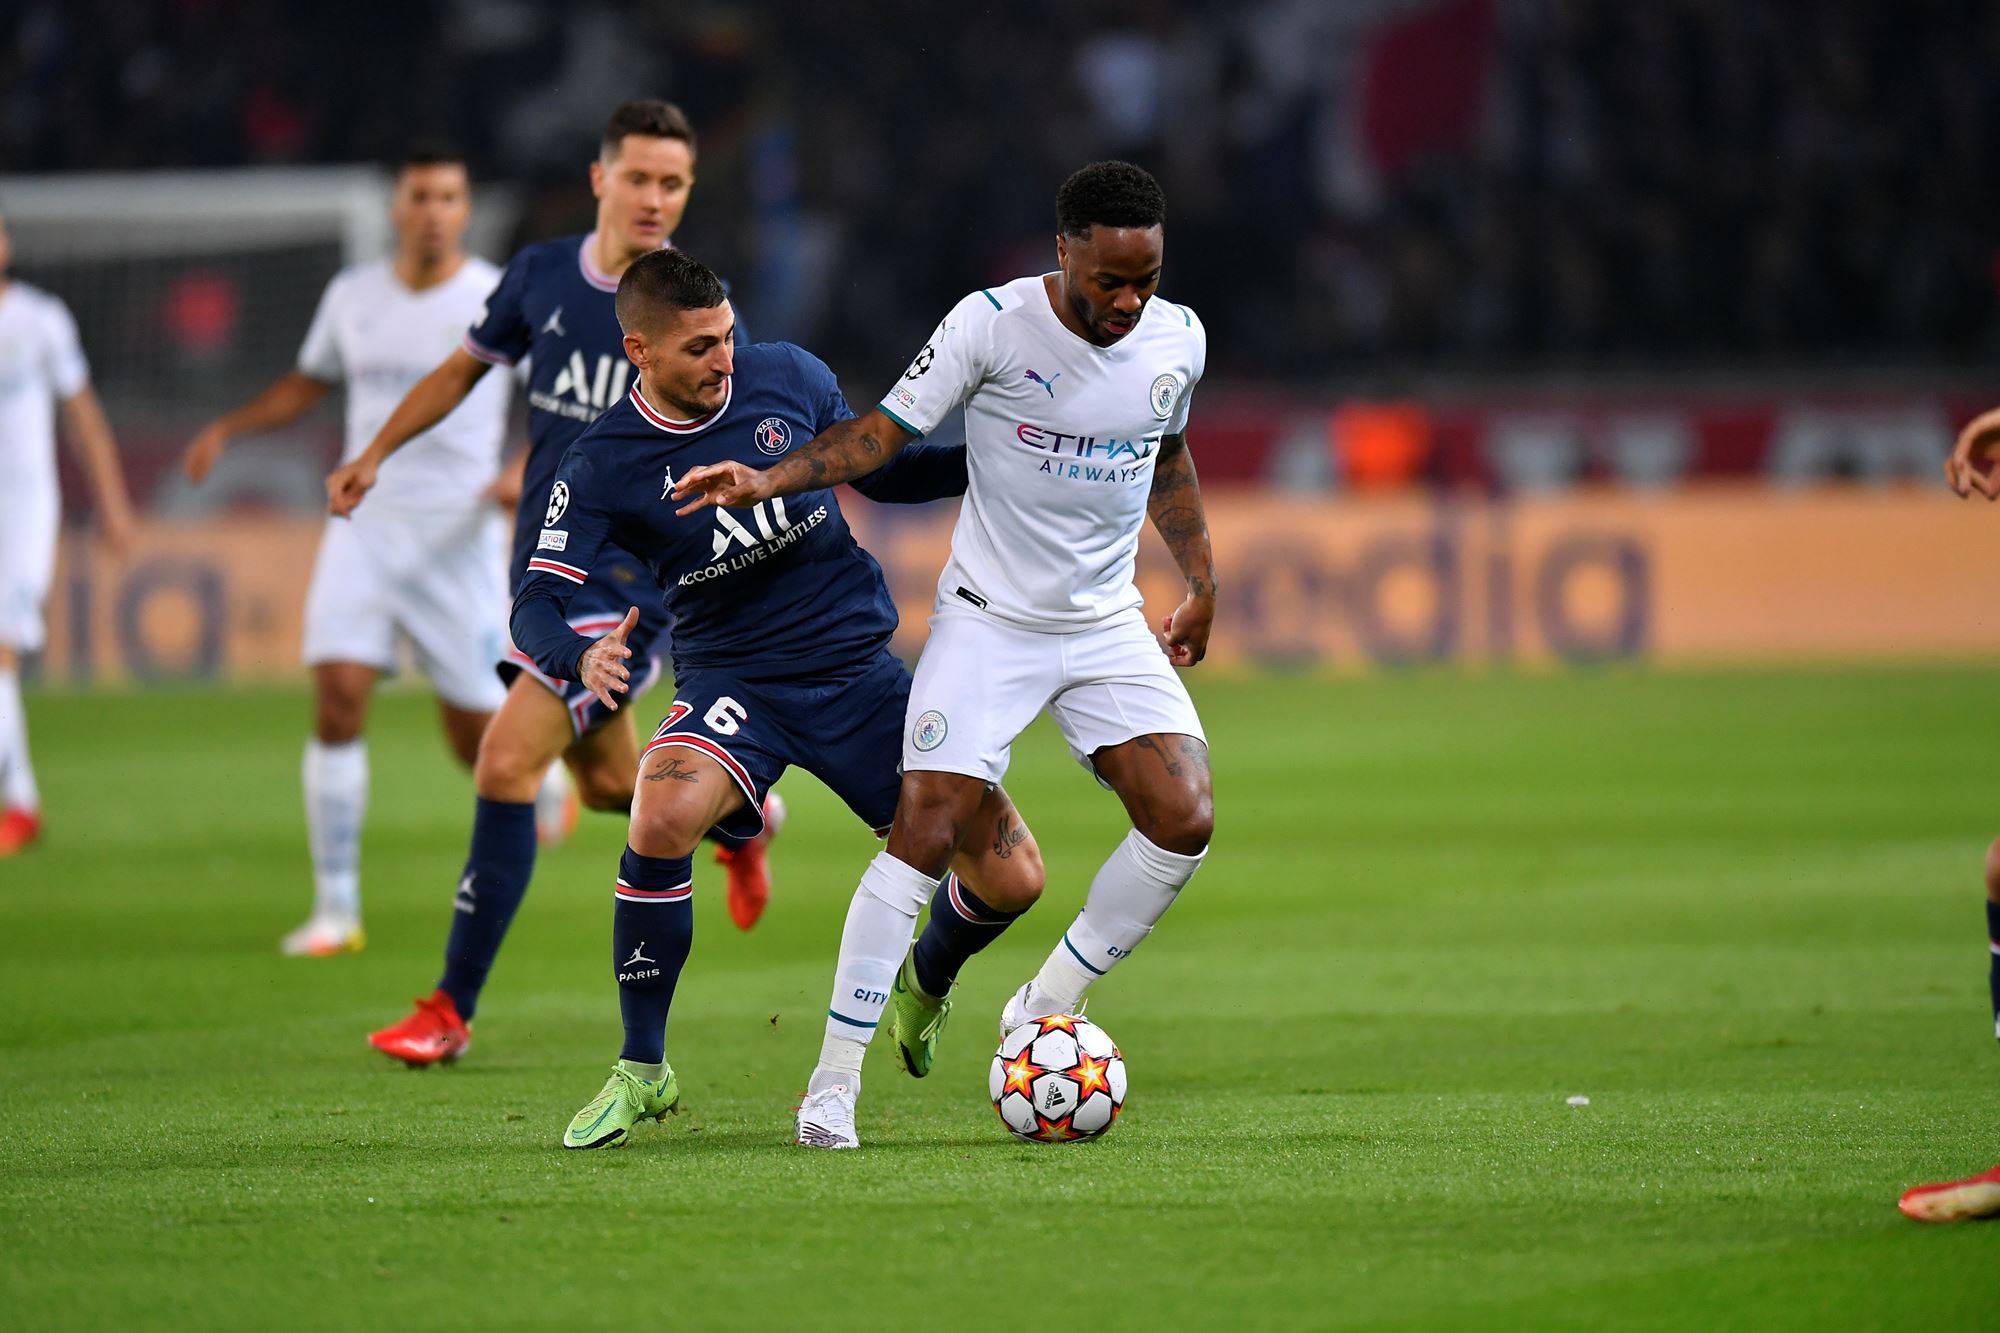 Pictures of the victory over Manchester City | Paris Saint-Germain